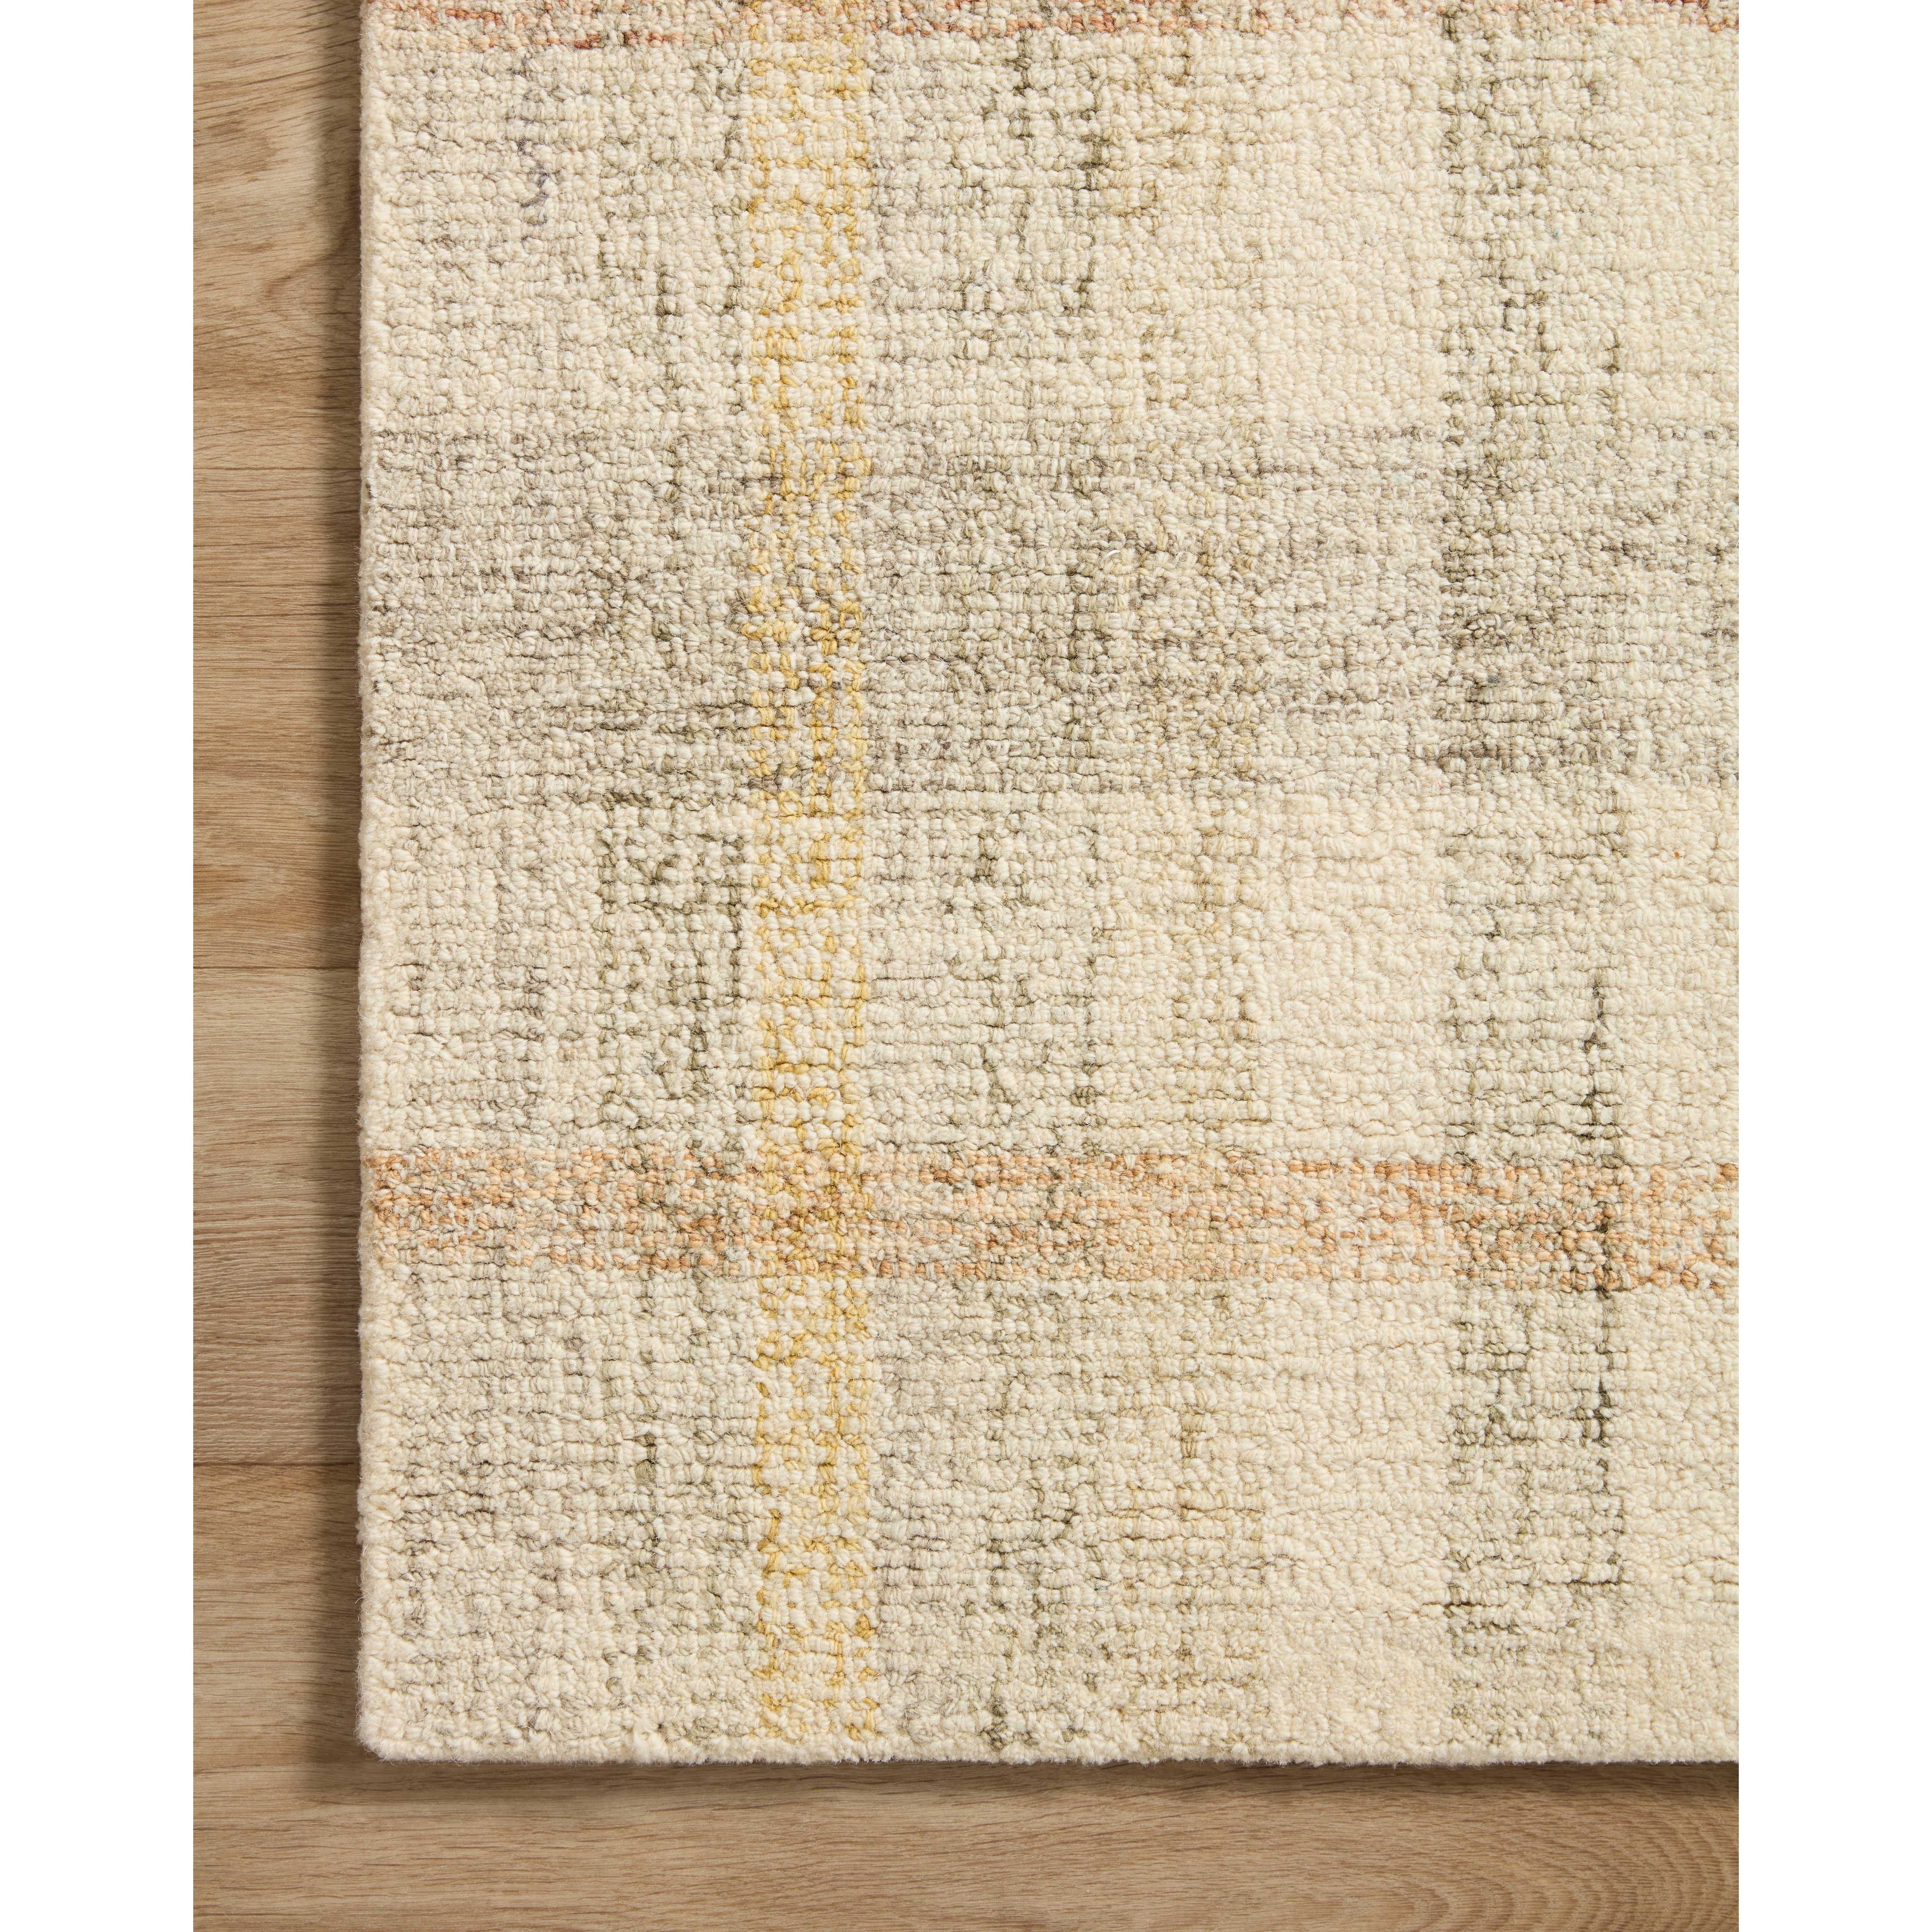 This rug nails the balance of a light + bright rug with a warm aesthetic. Reminiscent of our favorite casual, vintage striped hemp rugs, the Chris Natural / Multi rug will give a curated look to your space. Amethyst Home provides interior design services, furniture, rugs, and lighting in the Calabasas metro area.